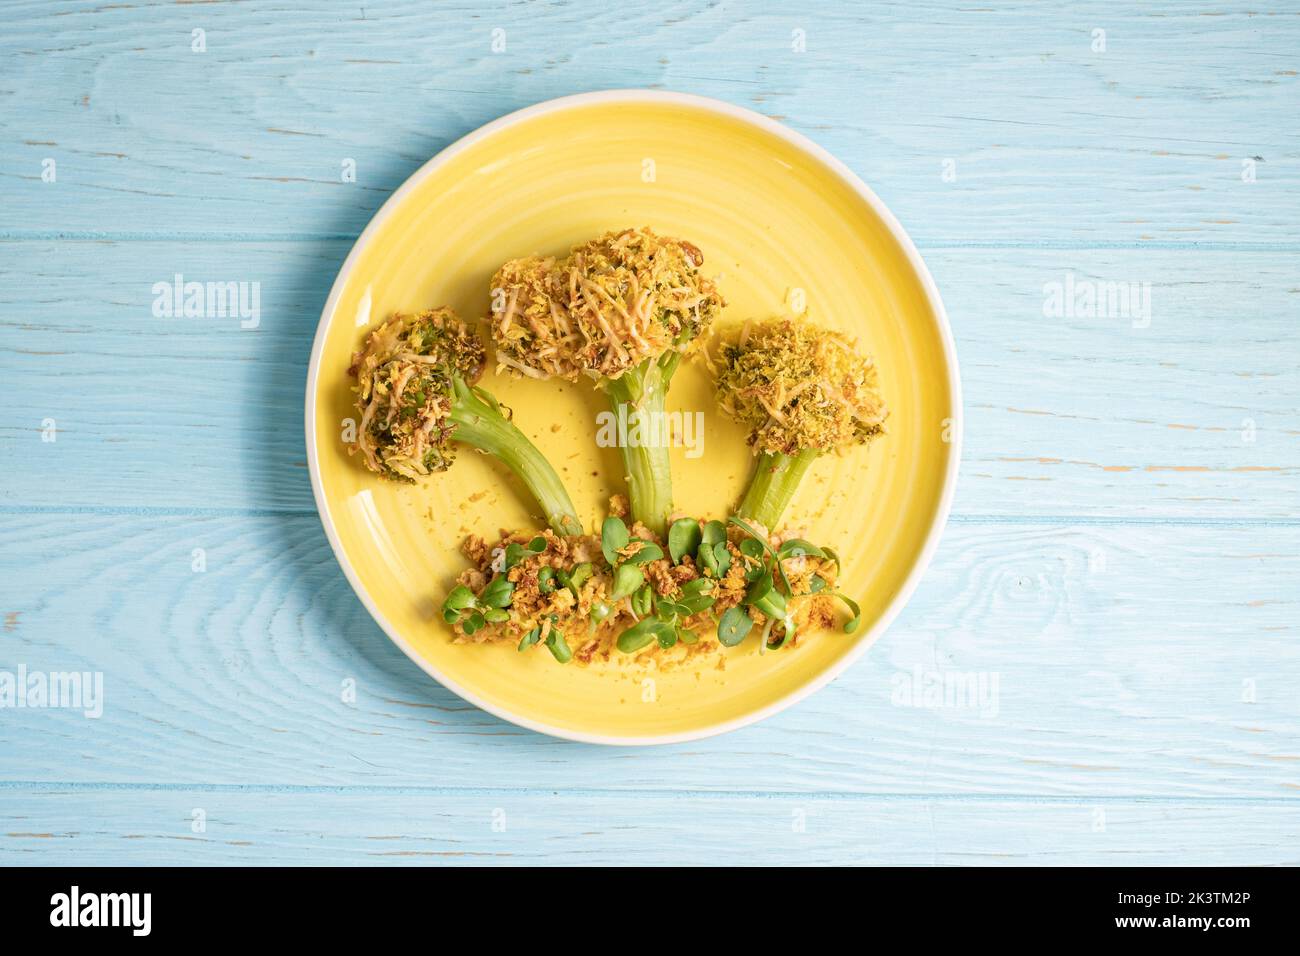 Kids food. Baked broccoli look like trees with hummus and sprout, ready to eat. Stock Photo